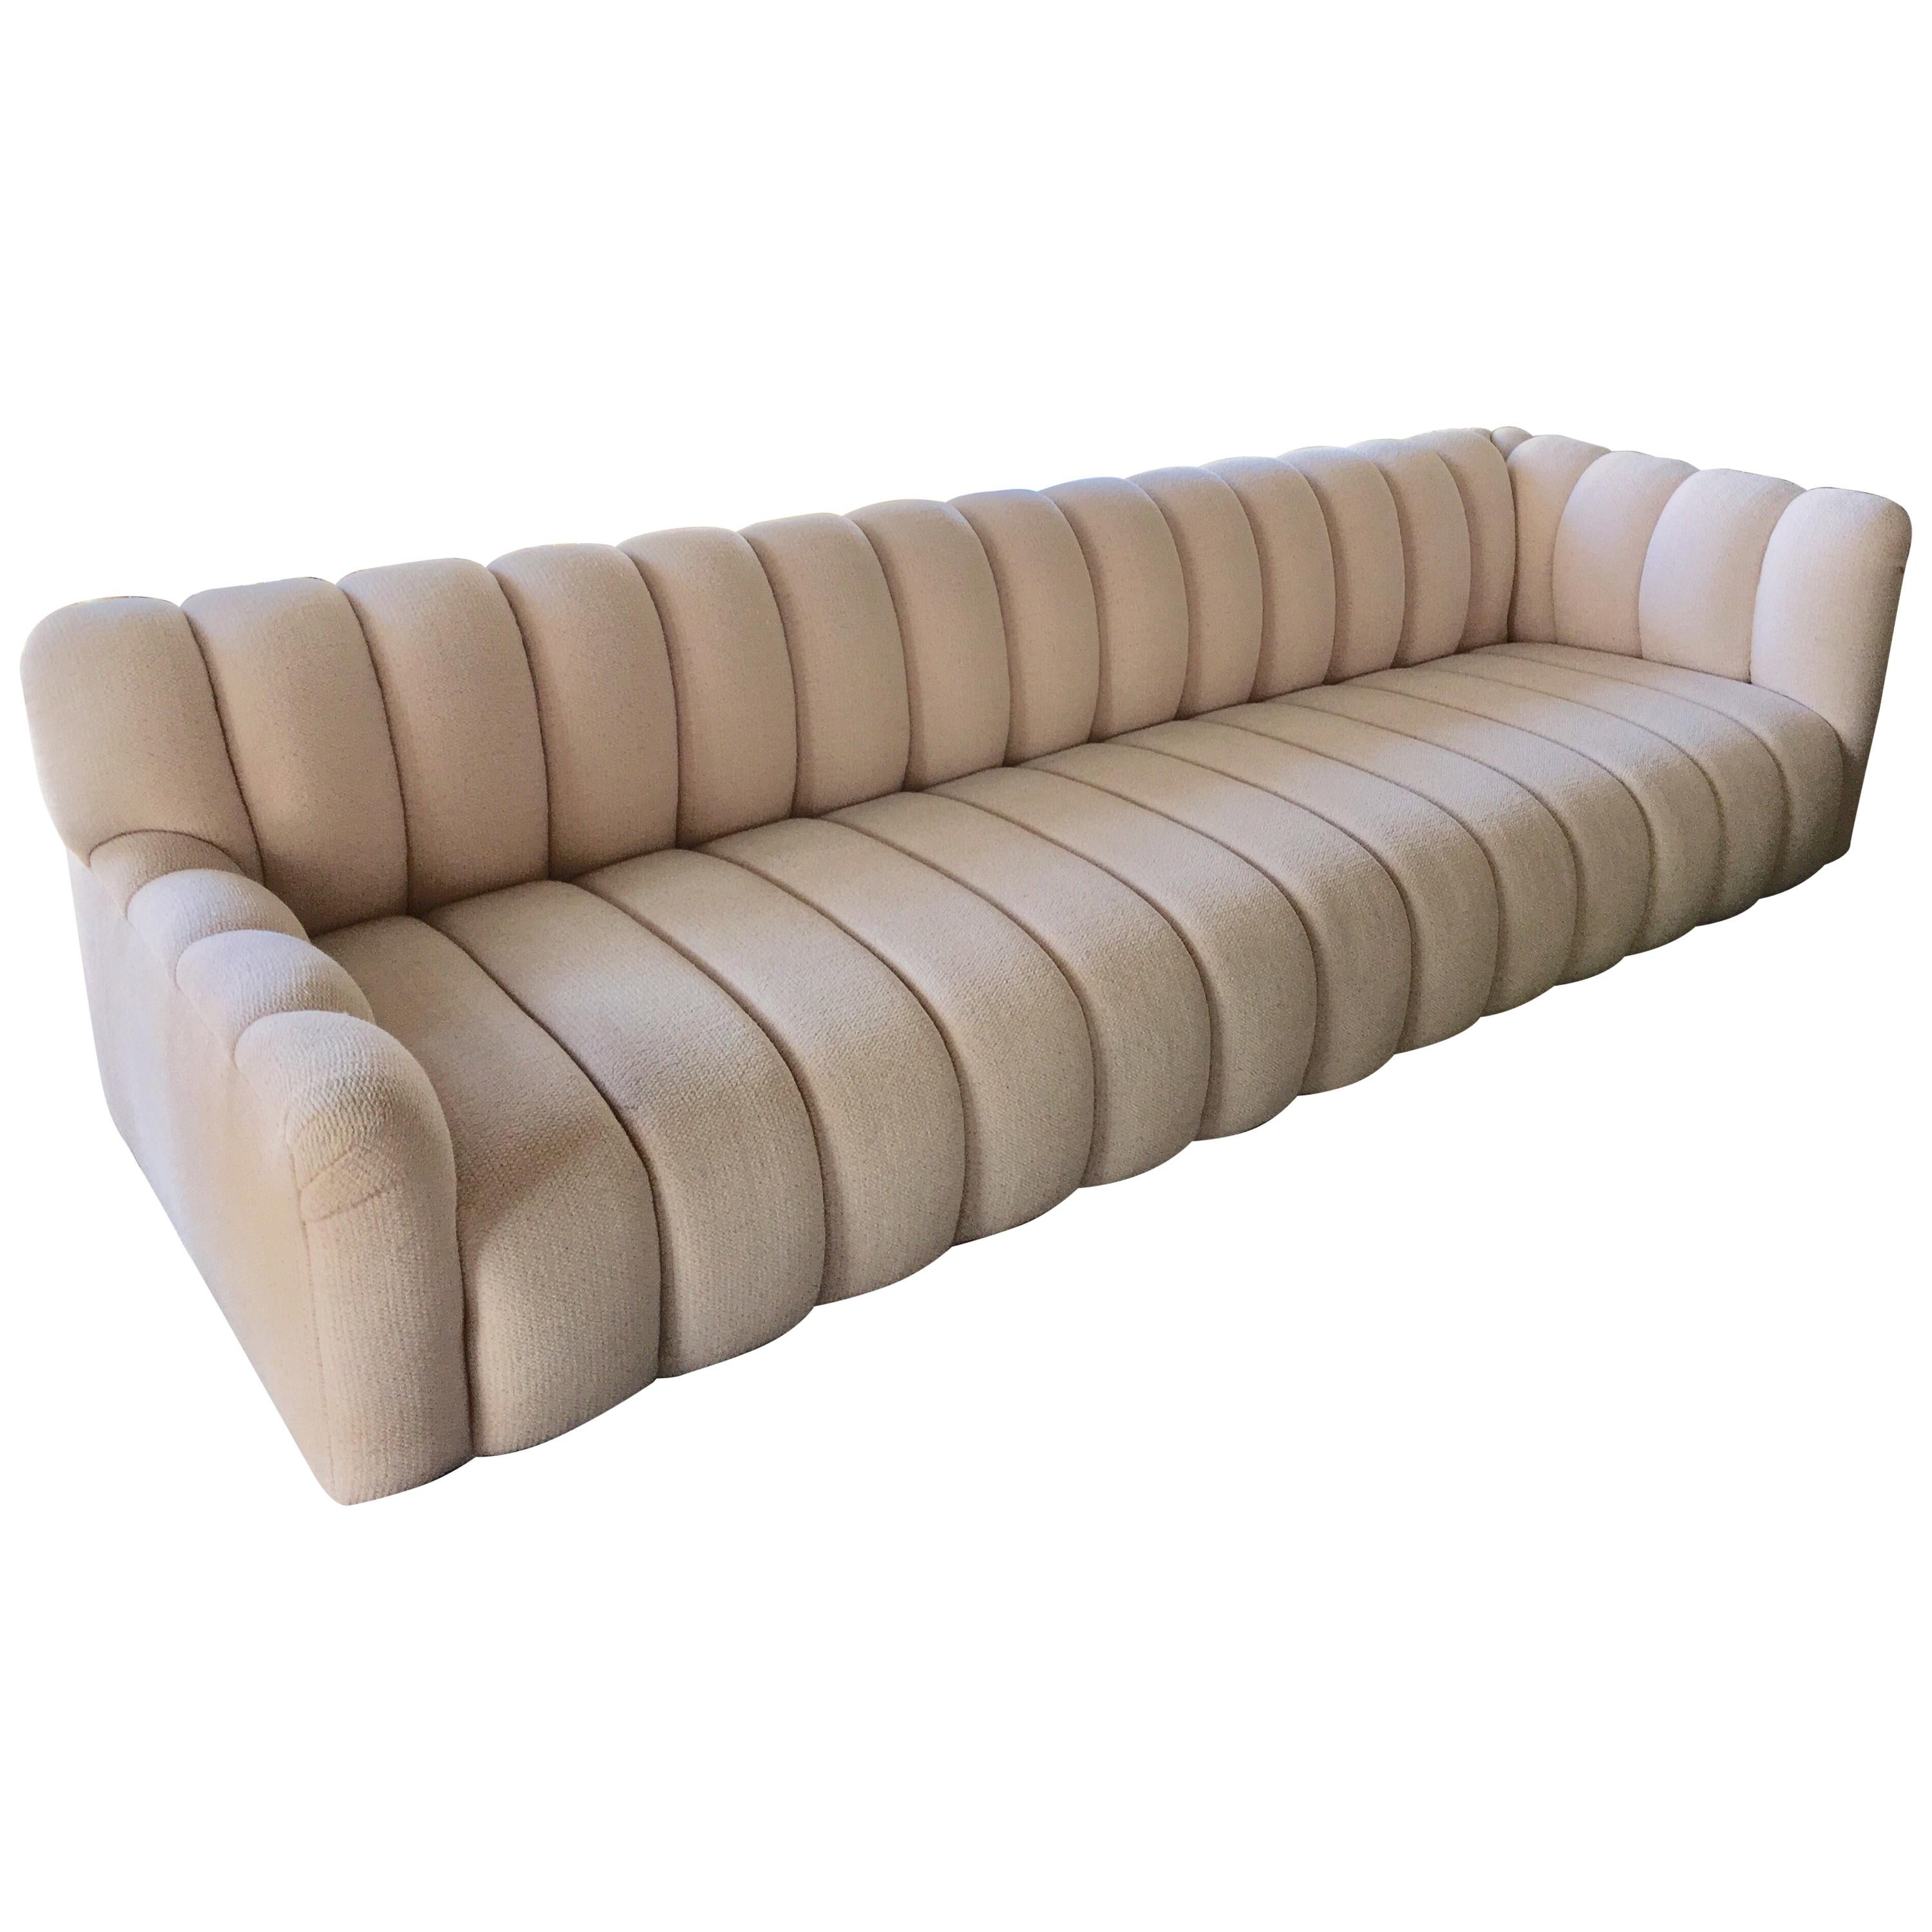 Steve Chase Palm Springs Style Channel Tufted Modern Sofa